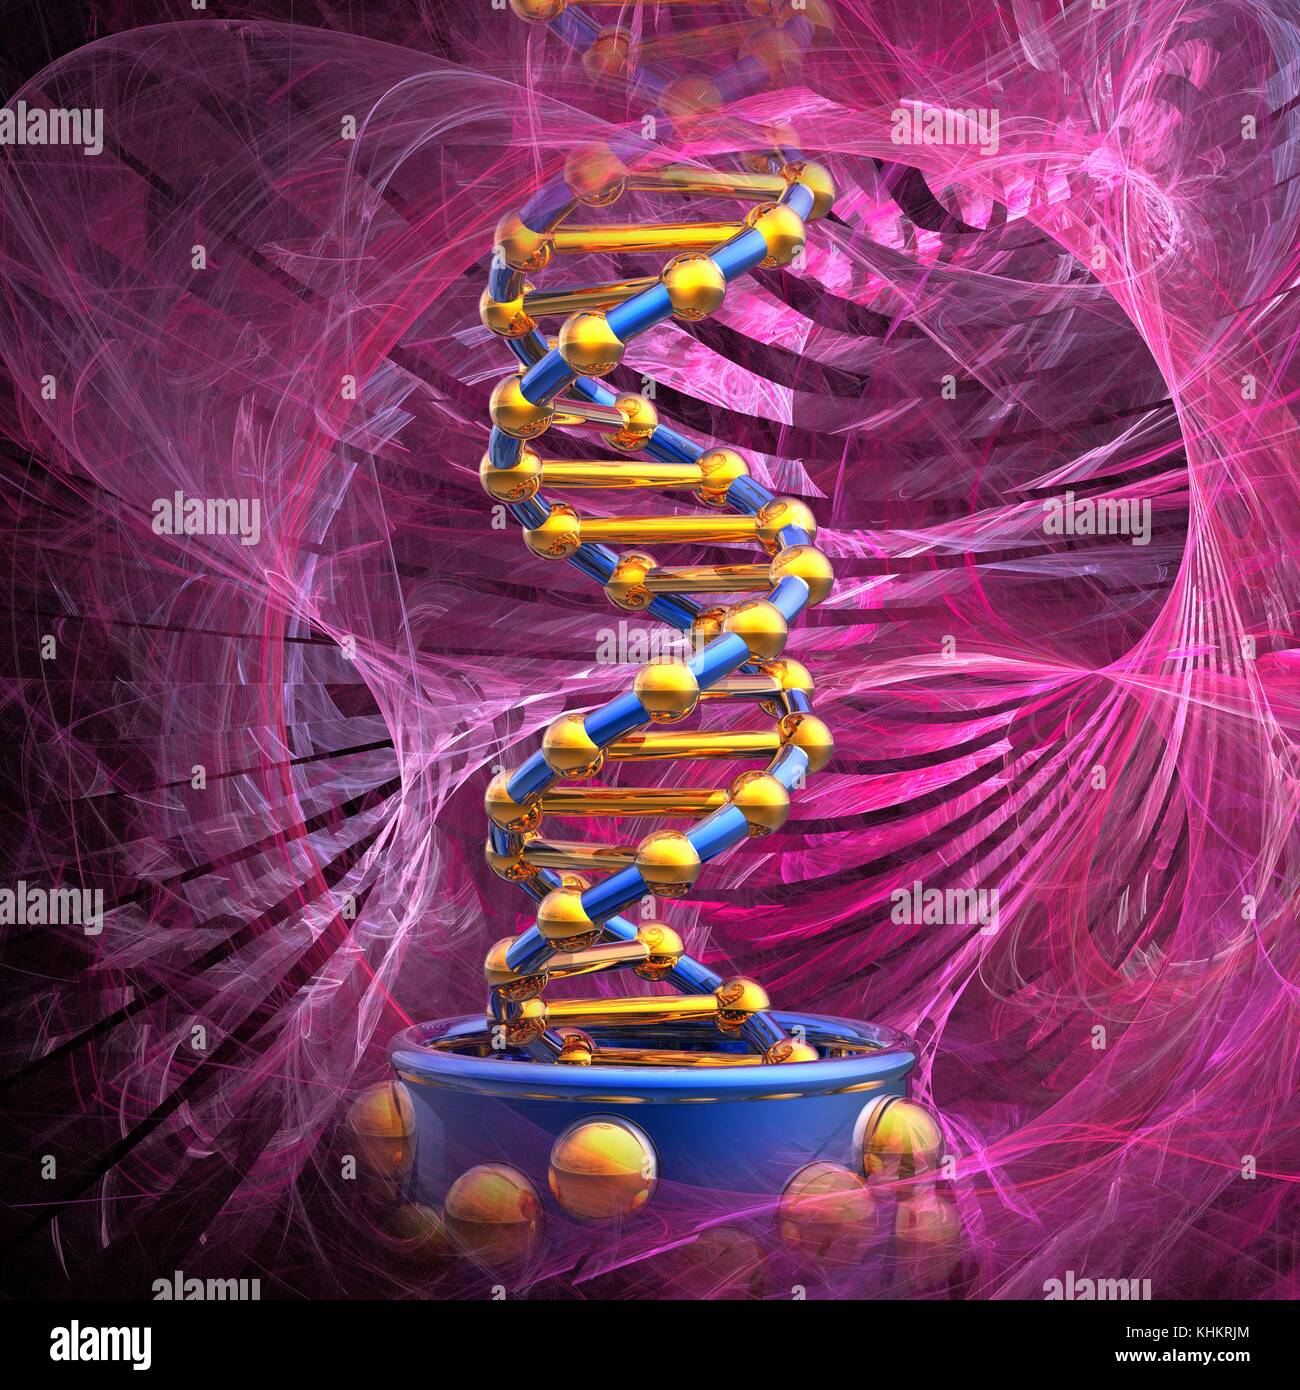 Conceptual illustration of a double stranded DNA (deoxyribonucleic acid) molecule with DNA generating or editing equipment. DNA is composed of two strands twisted into a double helix. Each strand consists of a sugar-phosphate backbone attached to nucleotide bases. There are four bases: adenine, cytosine, guanine and thymine. The bases are joined together by hydrogen bonds. DNA contains sections called genes that encode the body's genetic information. Stock Photo